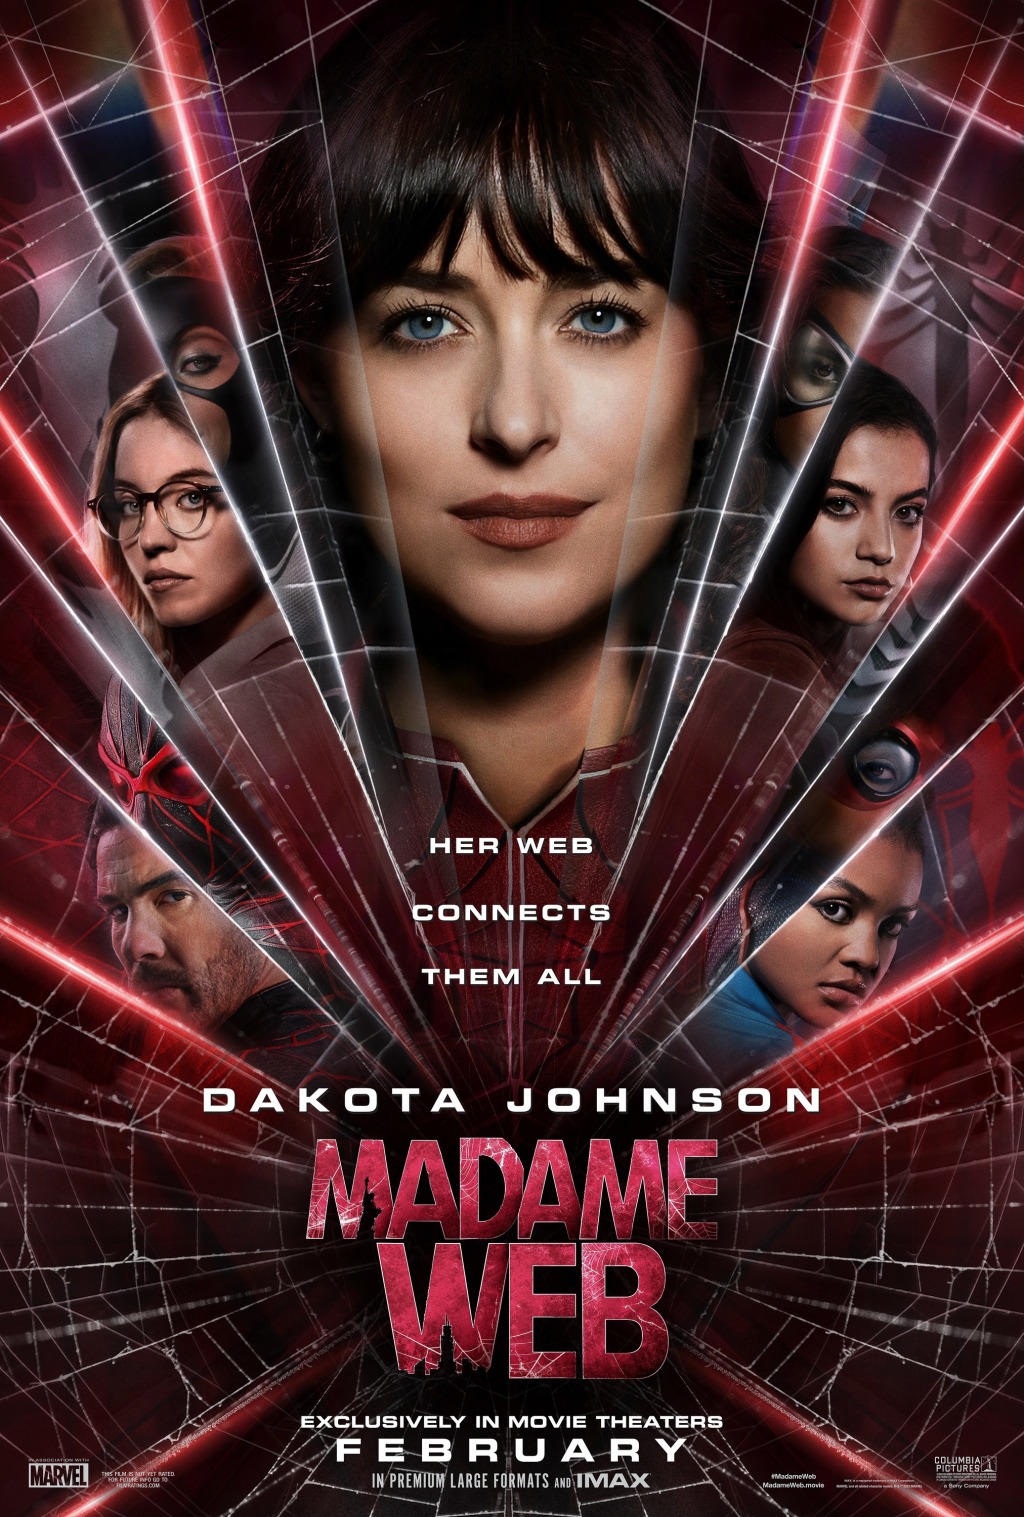 Madame Web Review — An untraditional superhero film that’s better than you might think